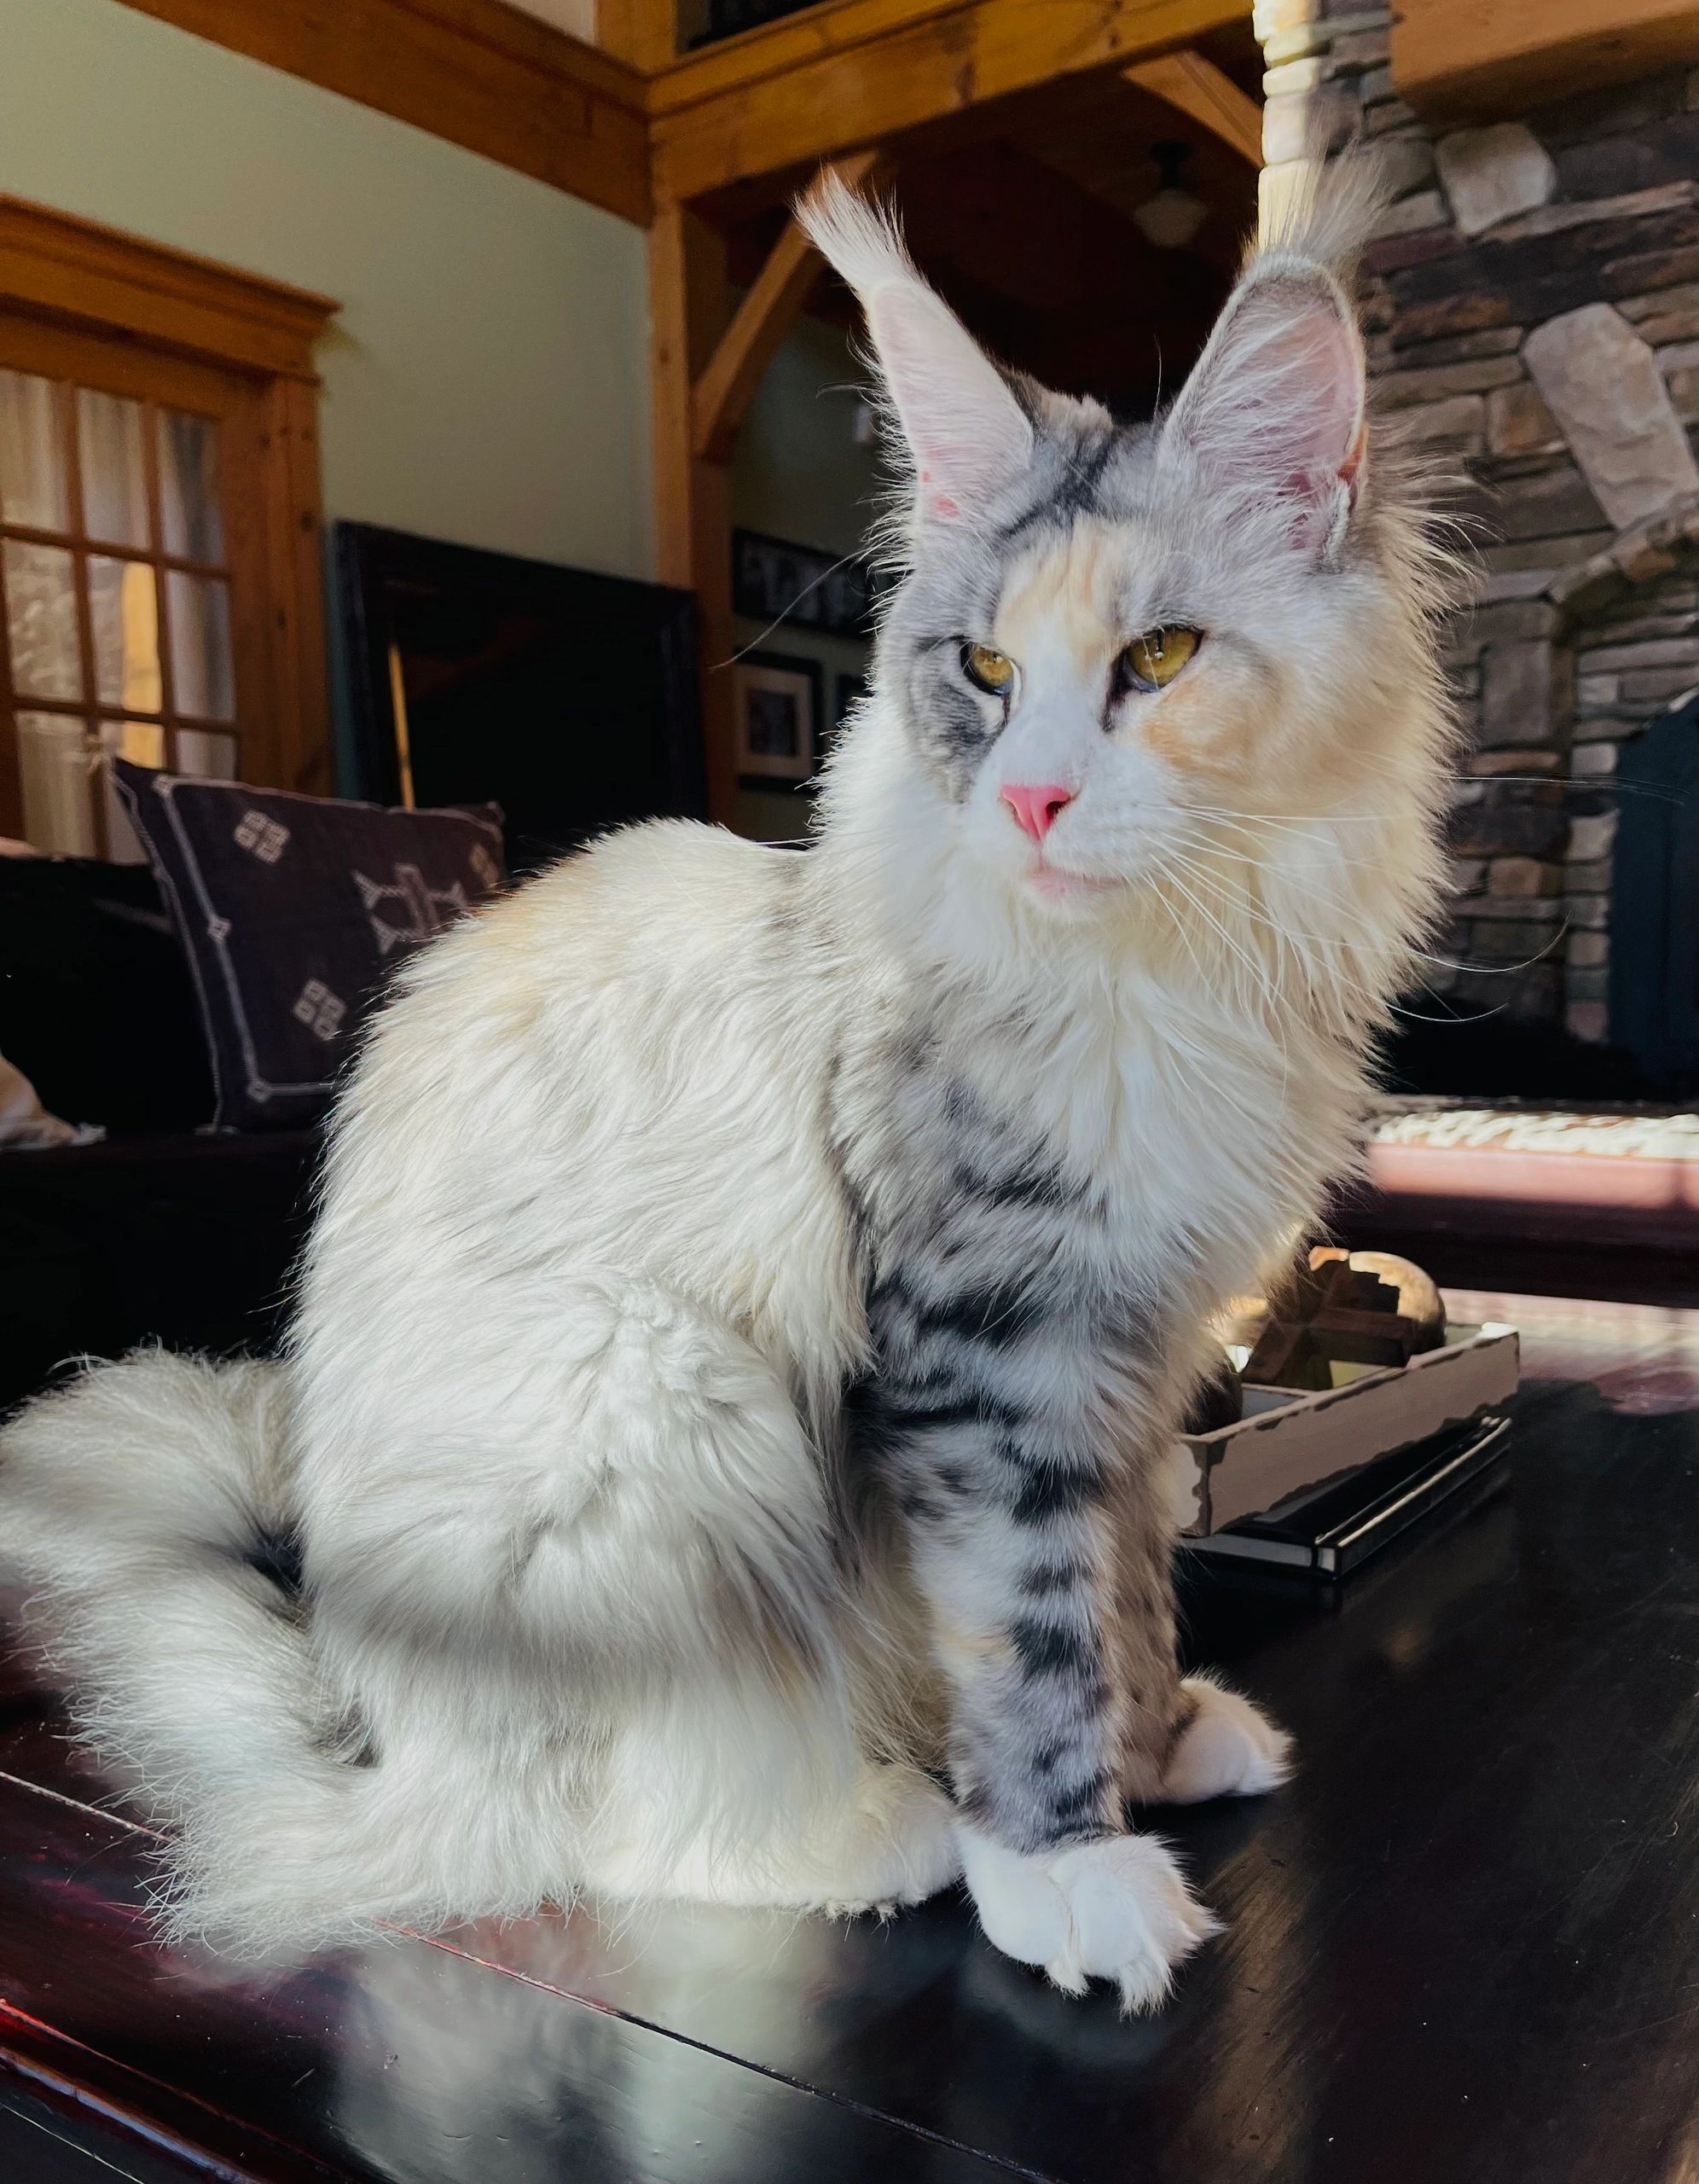 European Maine Coons for sale
Maine Coons NY
Giant Maine Coons